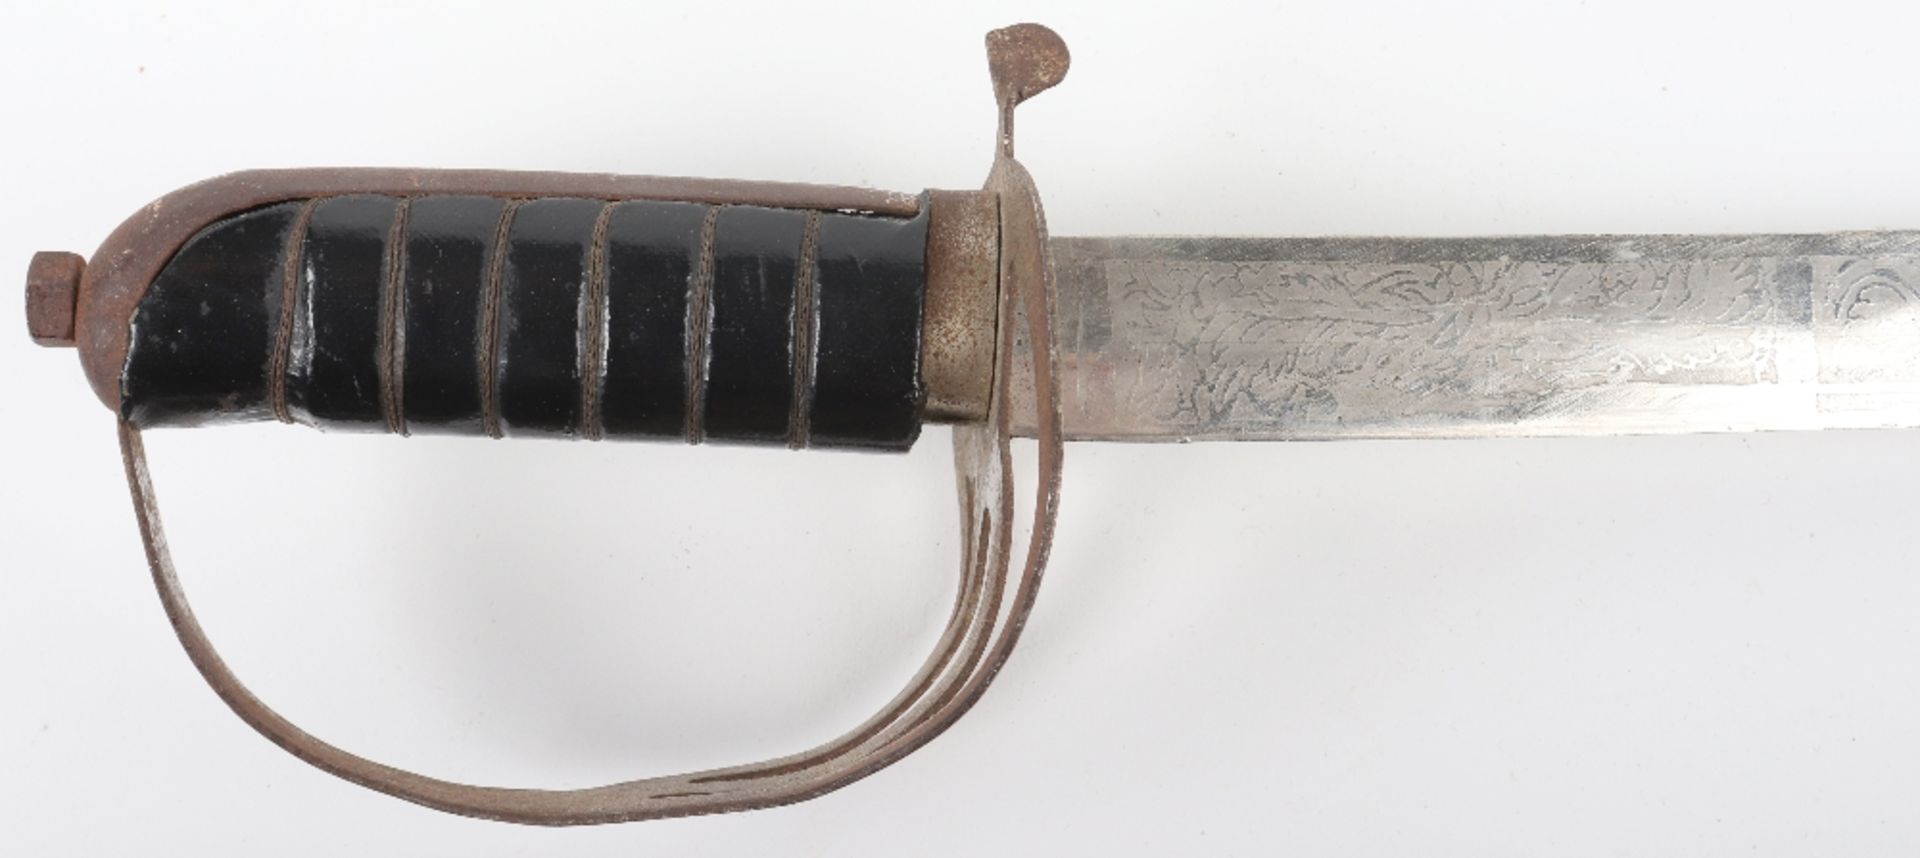 Two bayonets and a sword - Image 11 of 28